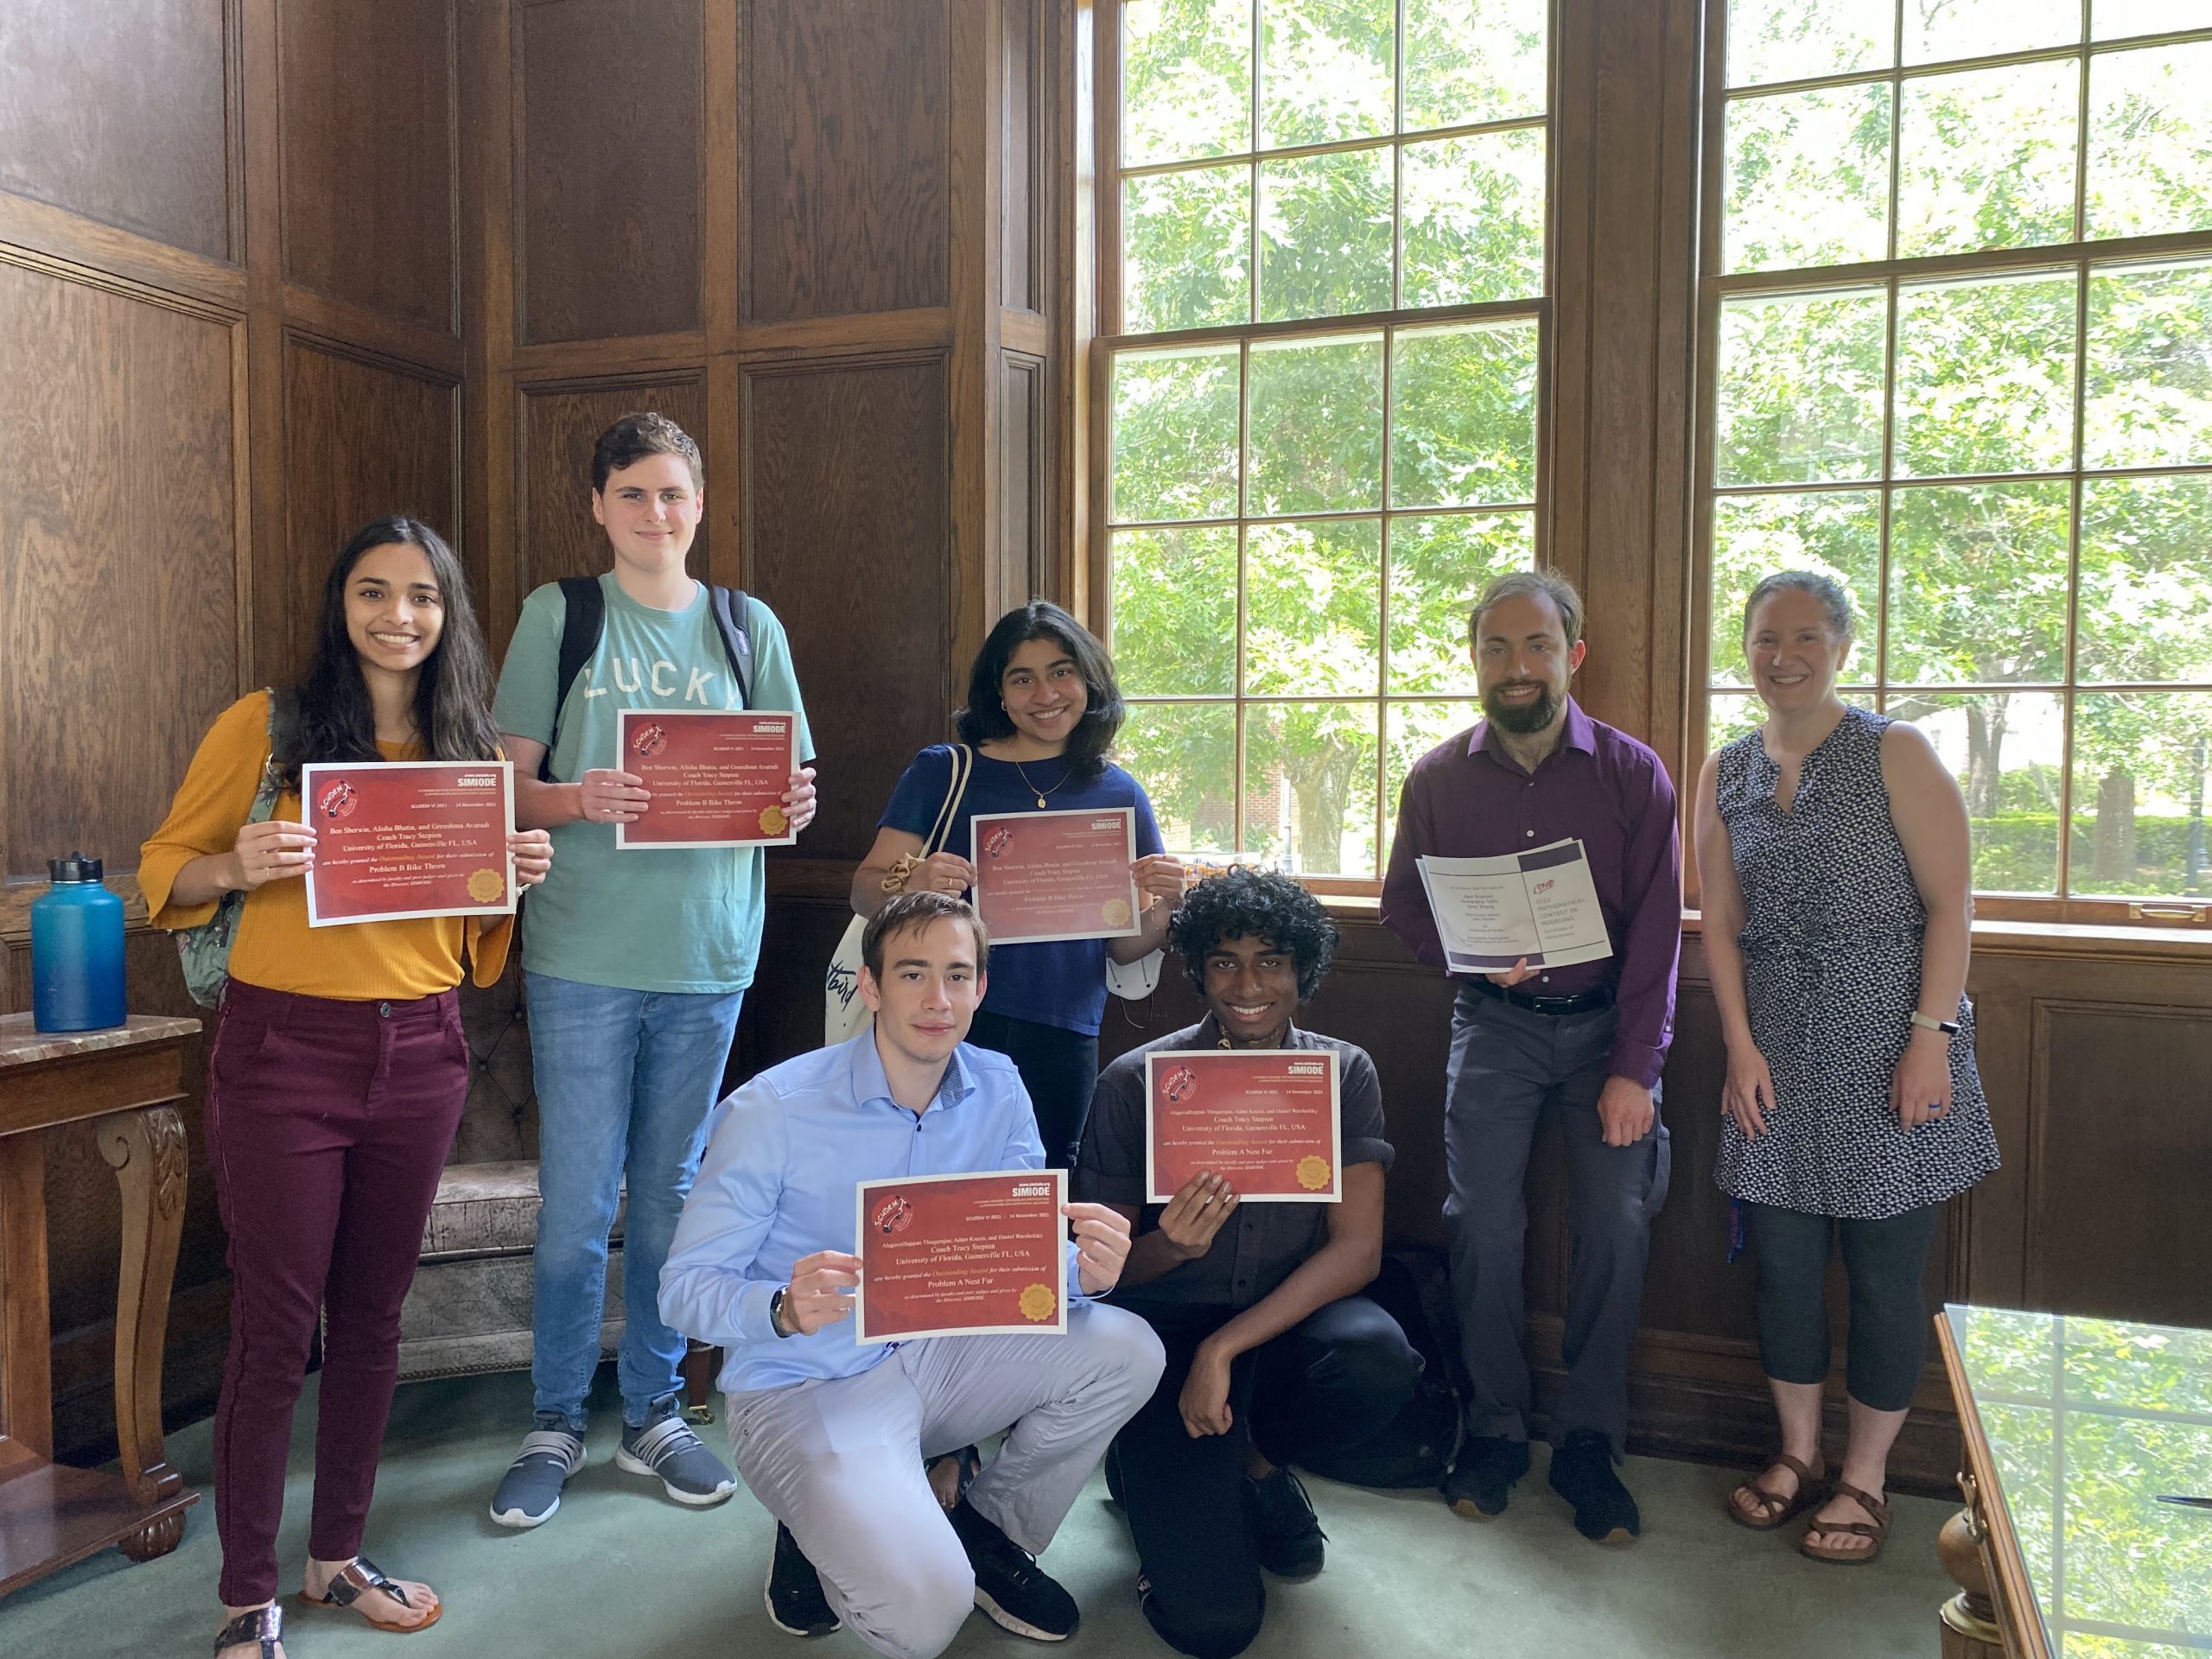 Some SCUDEM 2021 and MCM/ICM 2022 participants at the Department of Mathematics Spring Celebration